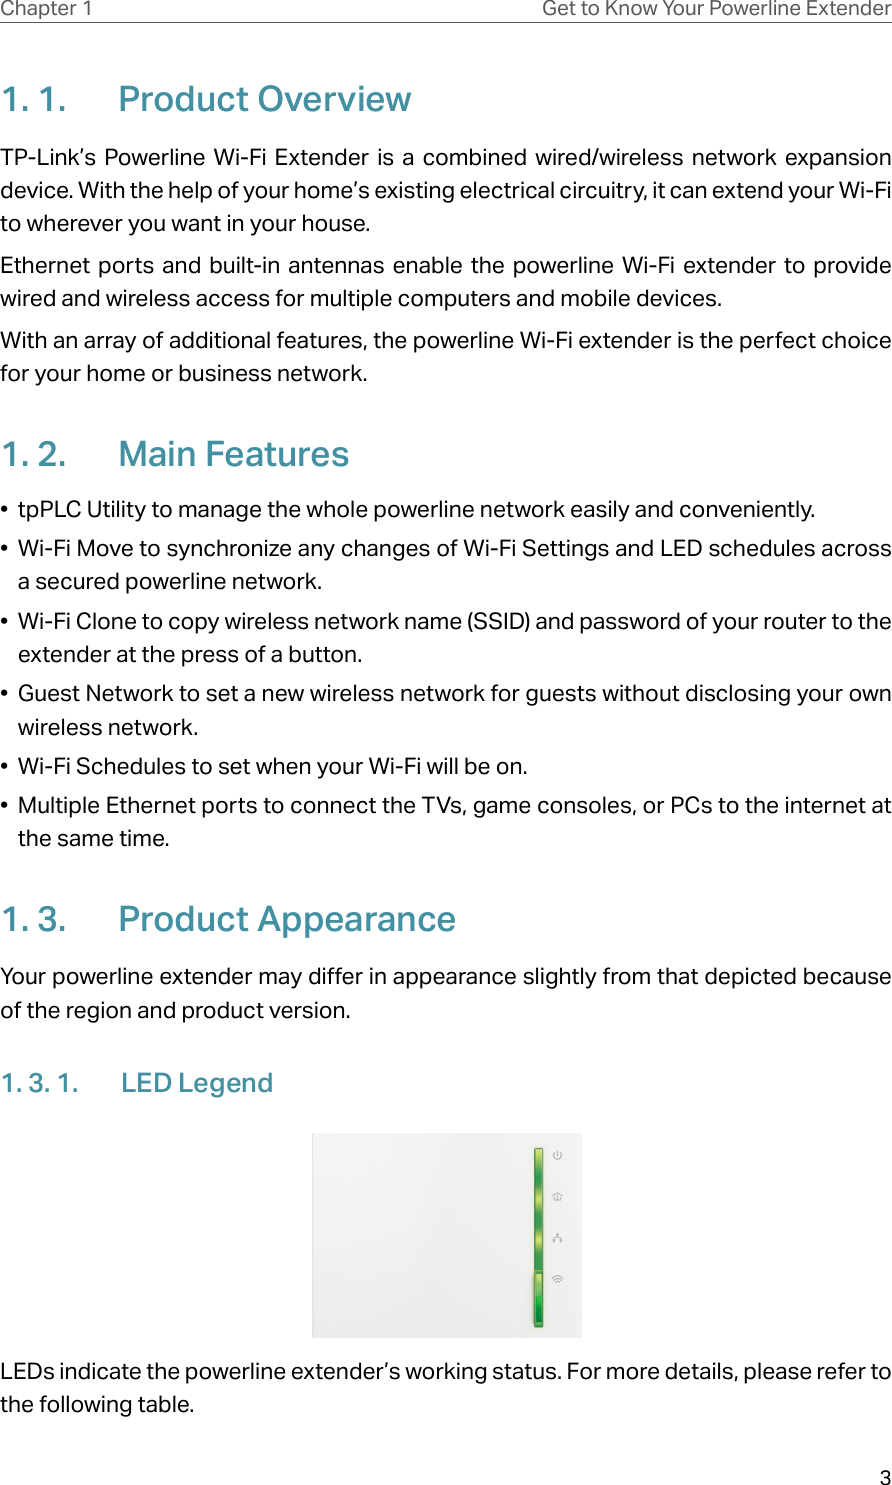 3Chapter 1 Get to Know Your Powerline Extender1. 1.  Product OverviewTP-Link’s Powerline Wi-Fi Extender is a combined wired/wireless network expansion device. With the help of your home’s existing electrical circuitry, it can extend your Wi-Fi to wherever you want in your house. Ethernet ports and built-in antennas enable the powerline Wi-Fi extender to provide wired and wireless access for multiple computers and mobile devices.With an array of additional features, the powerline Wi-Fi extender is the perfect choice for your home or business network.1. 2.  Main Features•  tpPLC Utility to manage the whole powerline network easily and conveniently.•  Wi-Fi Move to synchronize any changes of Wi-Fi Settings and LED schedules across a secured powerline network.•  Wi-Fi Clone to copy wireless network name (SSID) and password of your router to the extender at the press of a button.•  Guest Network to set a new wireless network for guests without disclosing your own wireless network.•  Wi-Fi Schedules to set when your Wi-Fi will be on.•  Multiple Ethernet ports to connect the TVs, game consoles, or PCs to the internet at the same time.1. 3.  Product AppearanceYour powerline extender may differ in appearance slightly from that depicted because of the region and product version.1. 3. 1.  LED LegendLEDs indicate the powerline extender’s working status. For more details, please refer to the following table.